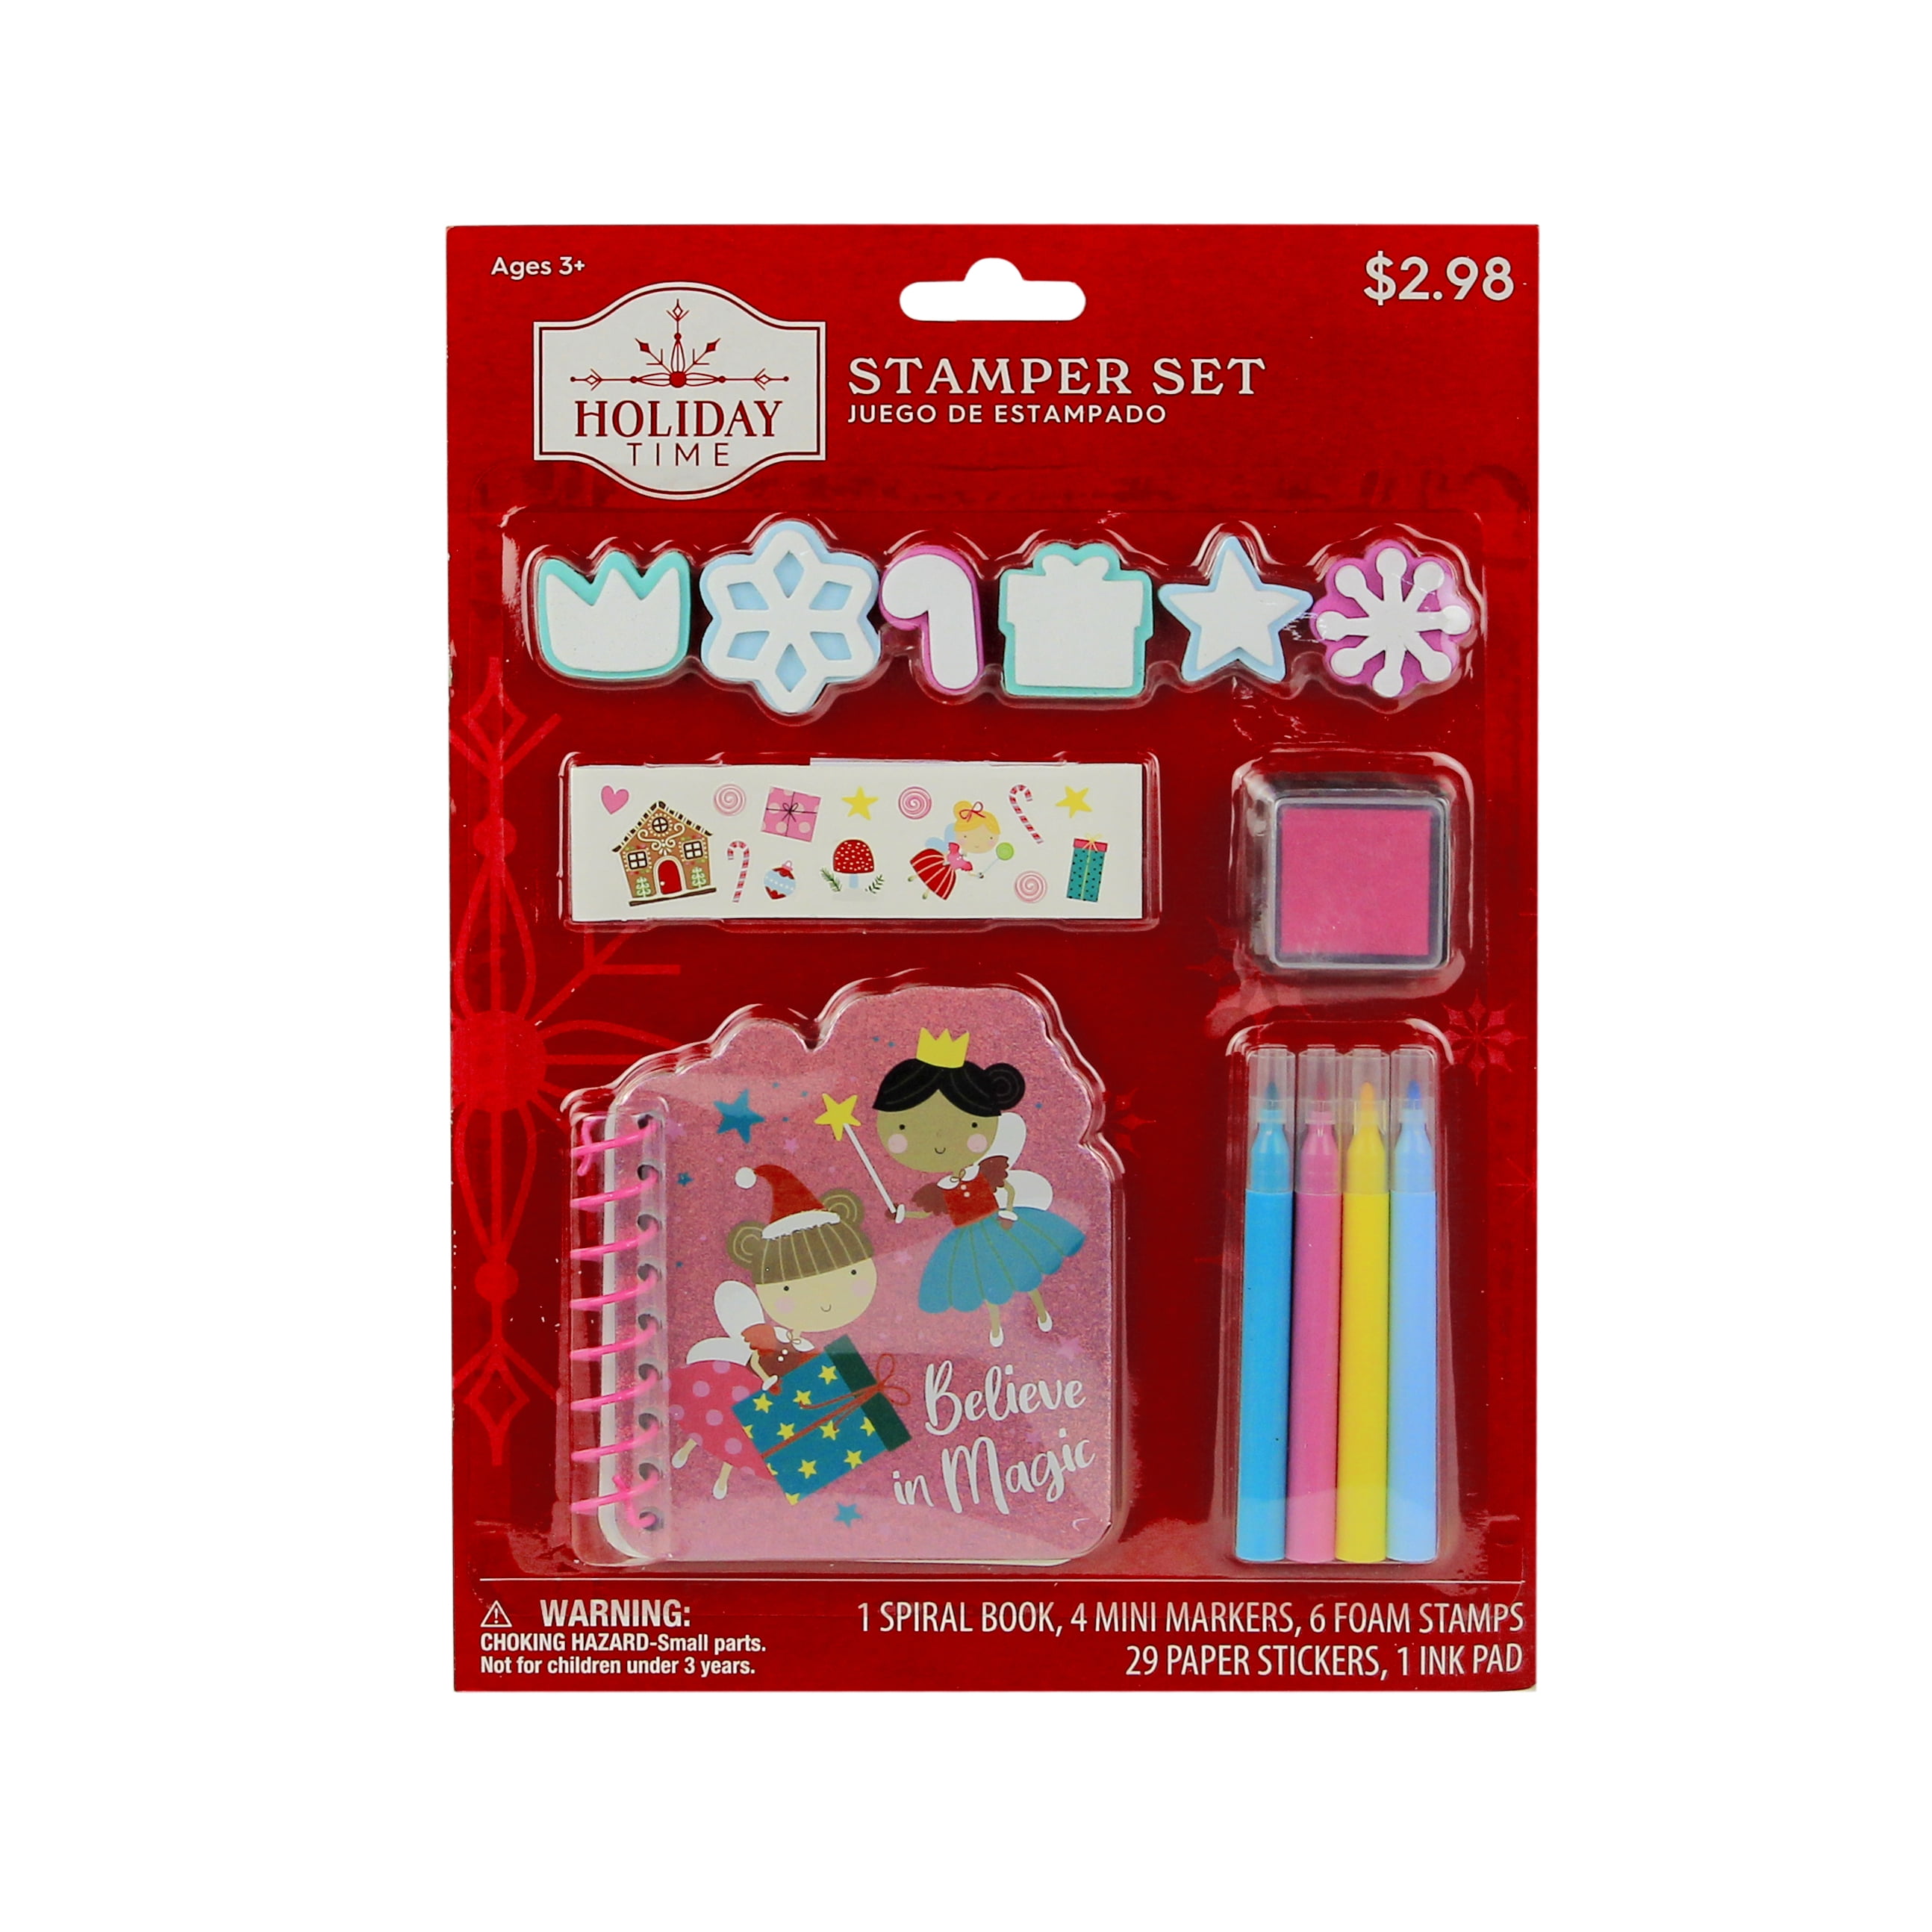 Holiday Time Fairies Stamper Set - 29 Paper Stickers Stamp Set